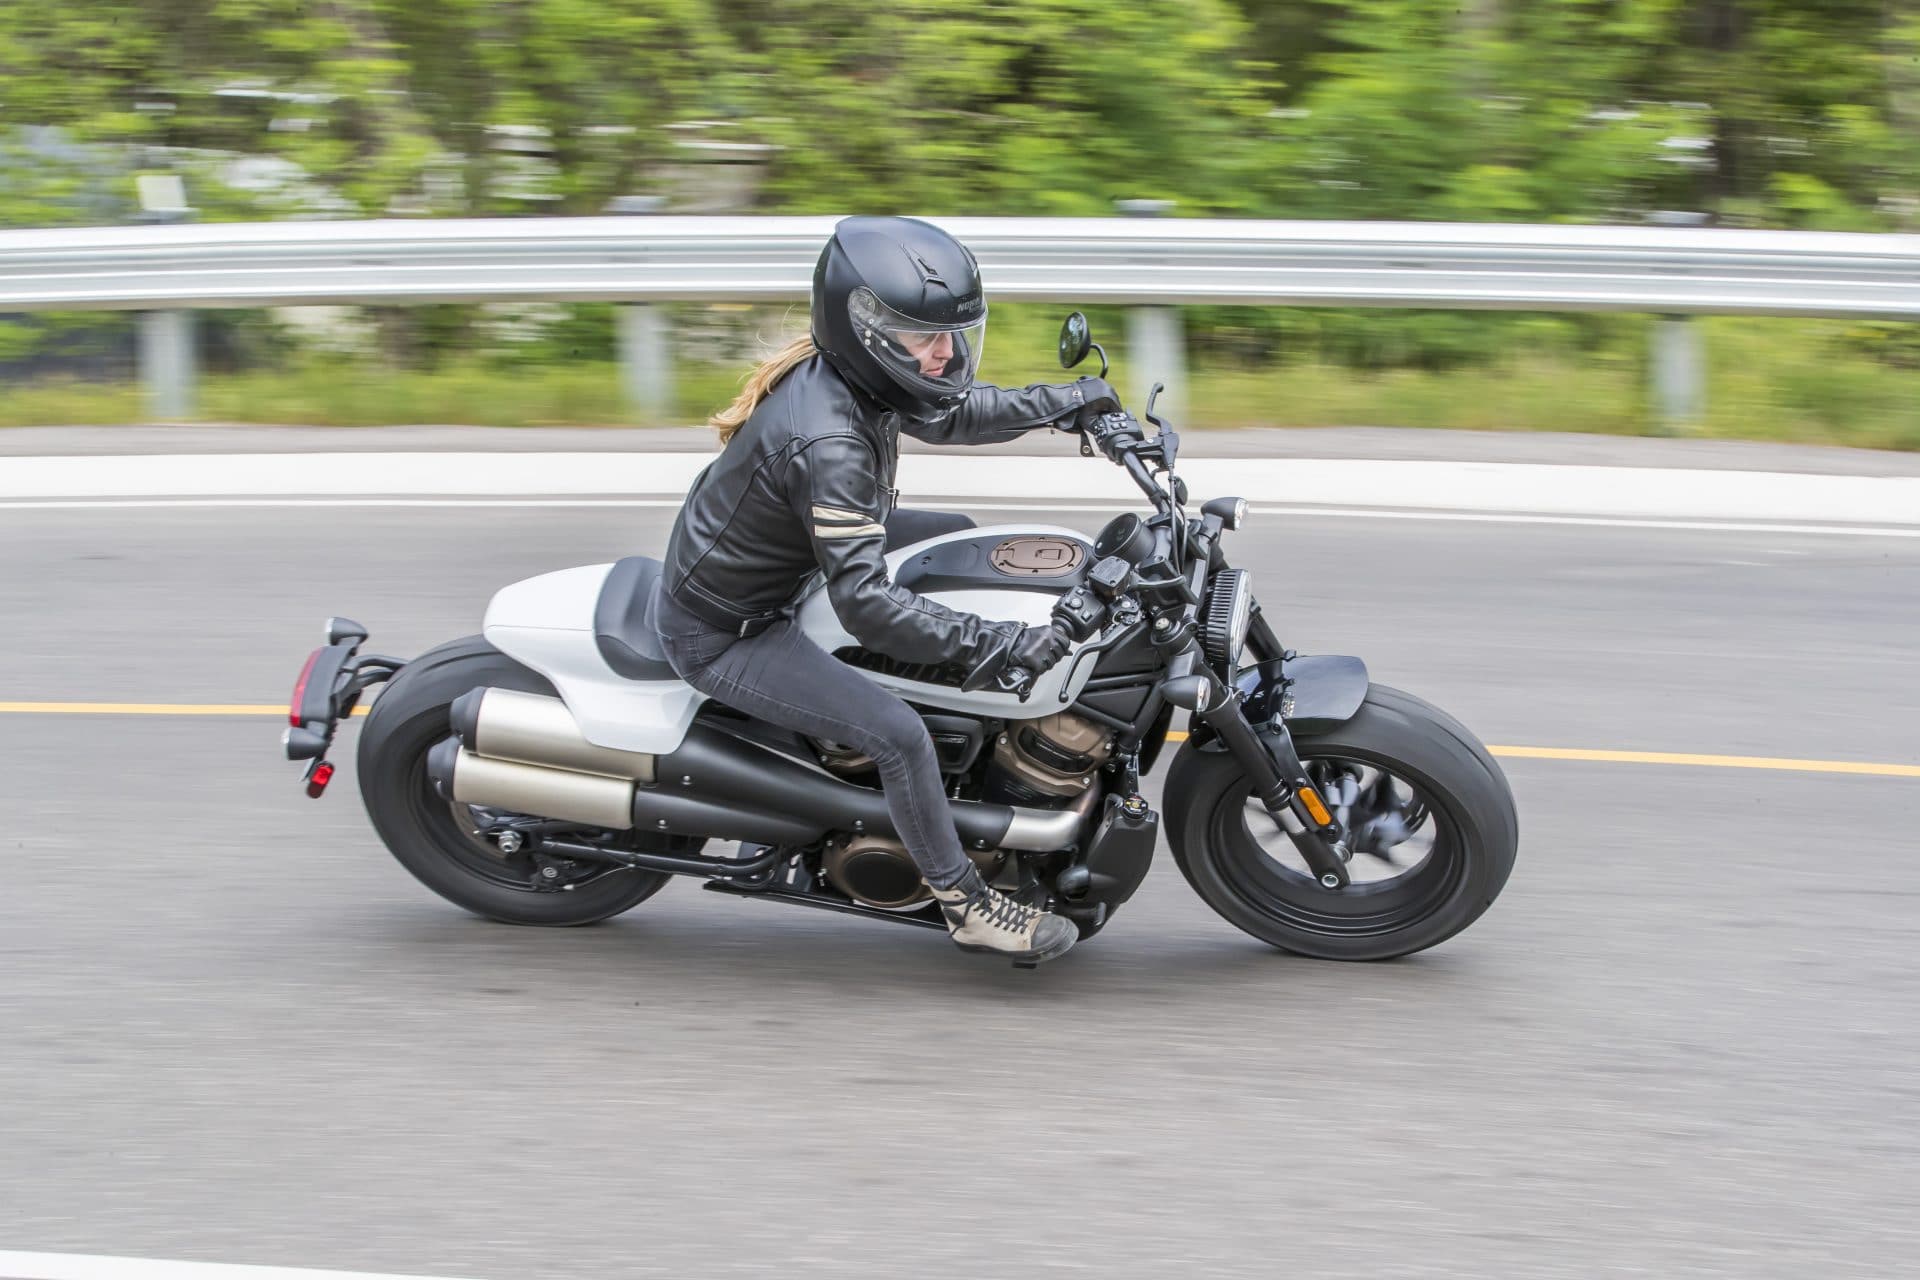 Test drive of the 2021 Sportster S; a redesigned look!